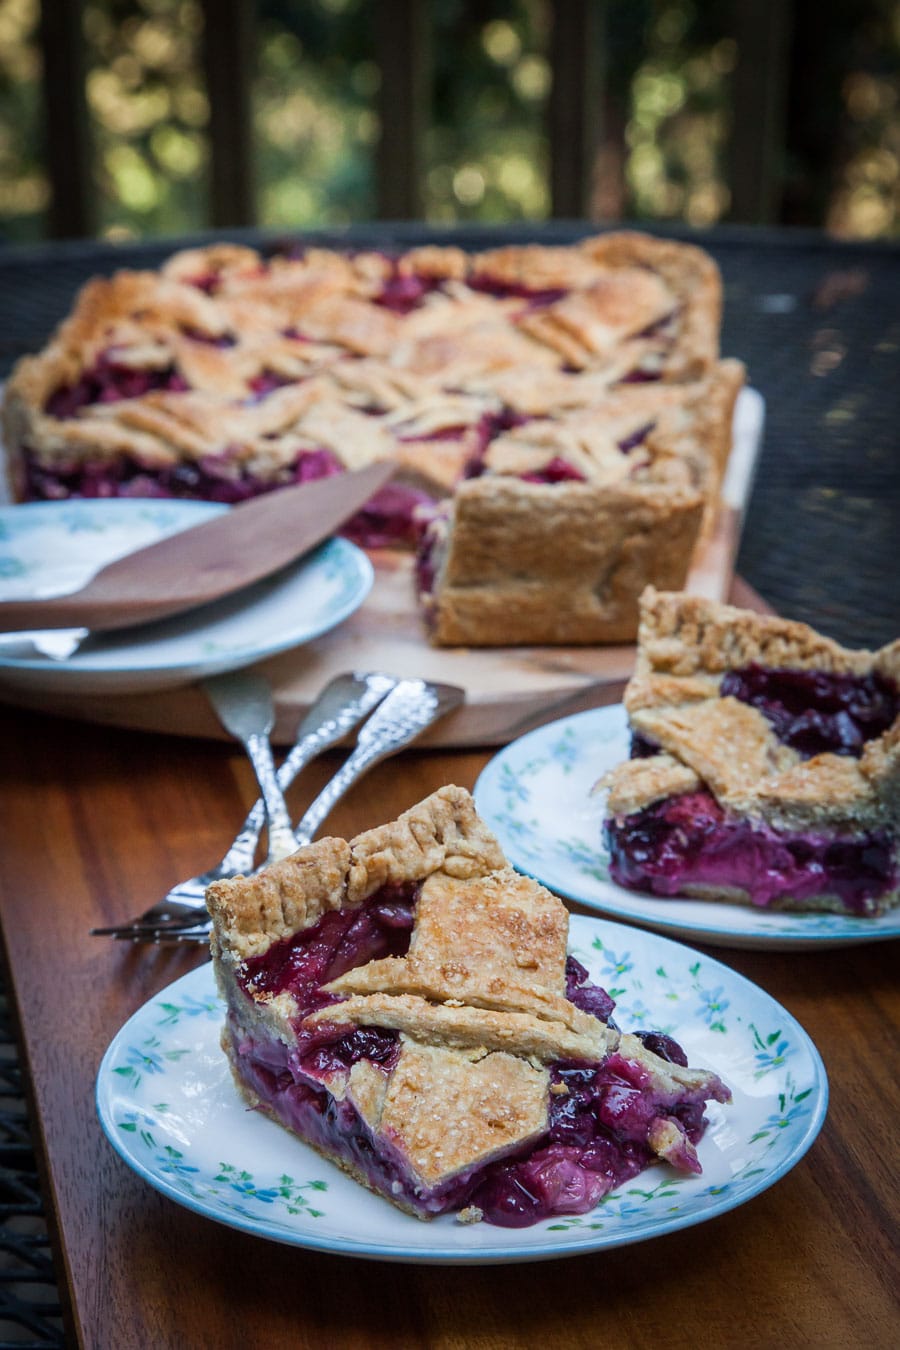 Rhubarb Berry Slab Pie. Photo and recipe by Irvin Lin of Eat the Love.